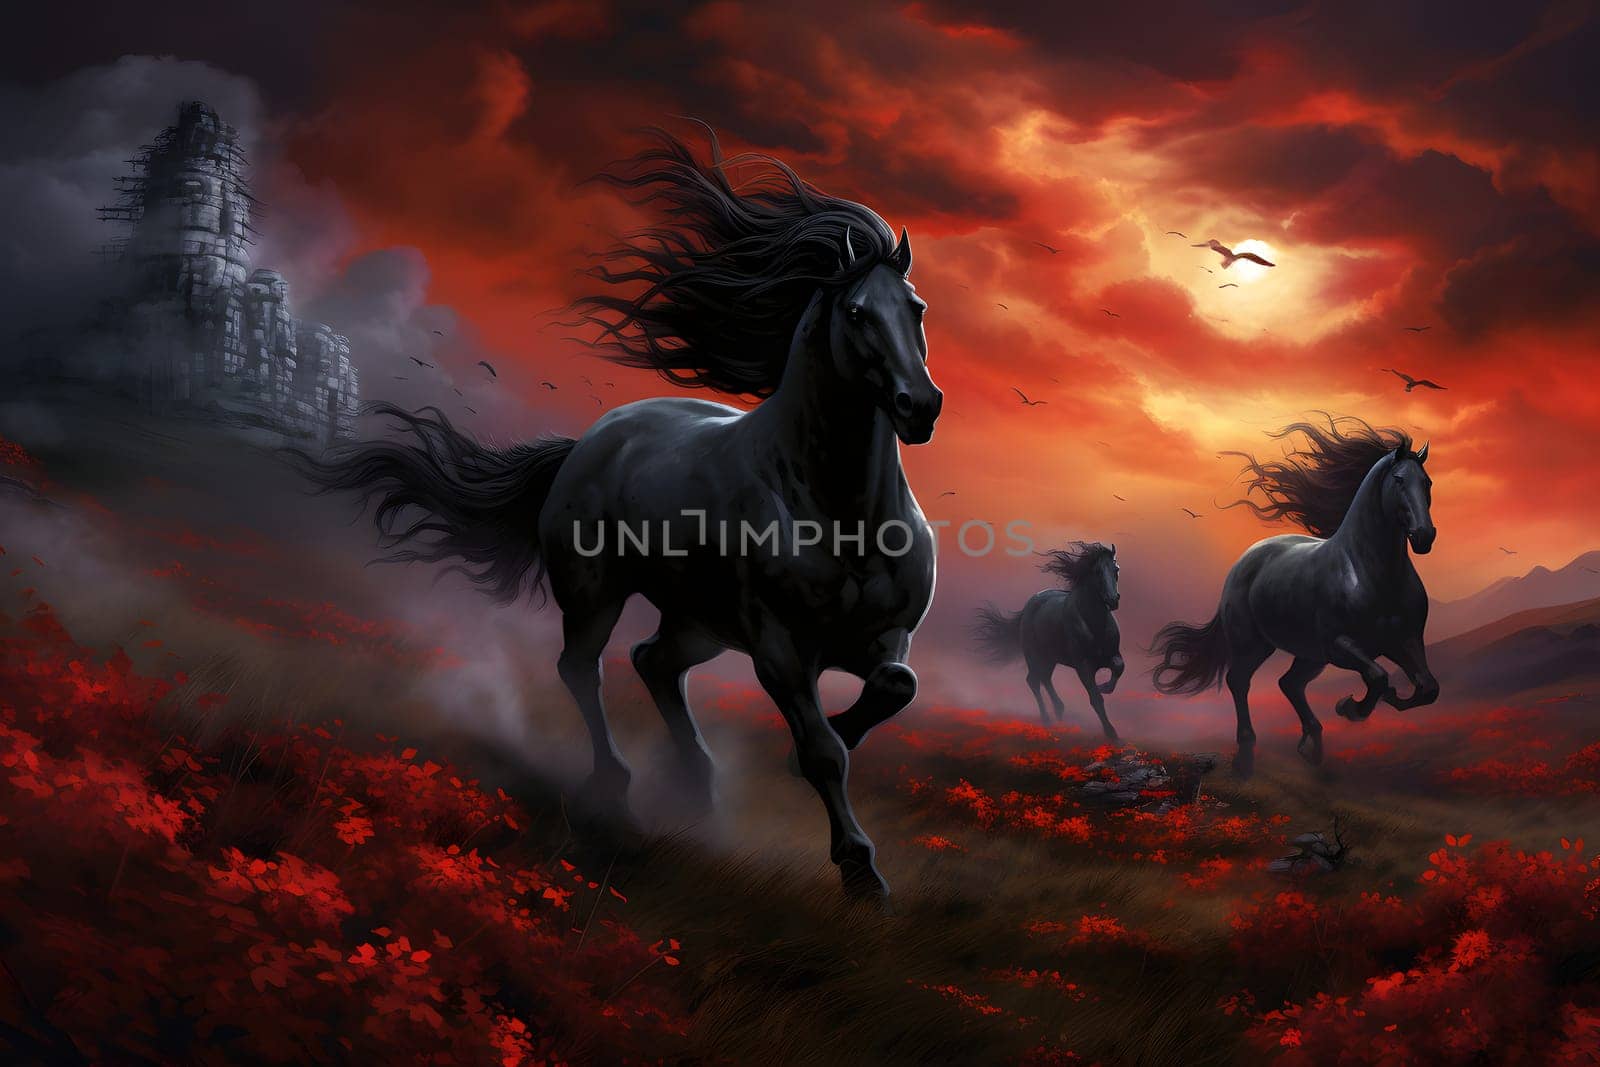 Dark horses running in a gloomy red field of flowers, in front of castle with dramatic clouds in sunset sky, neural network generated image by z1b